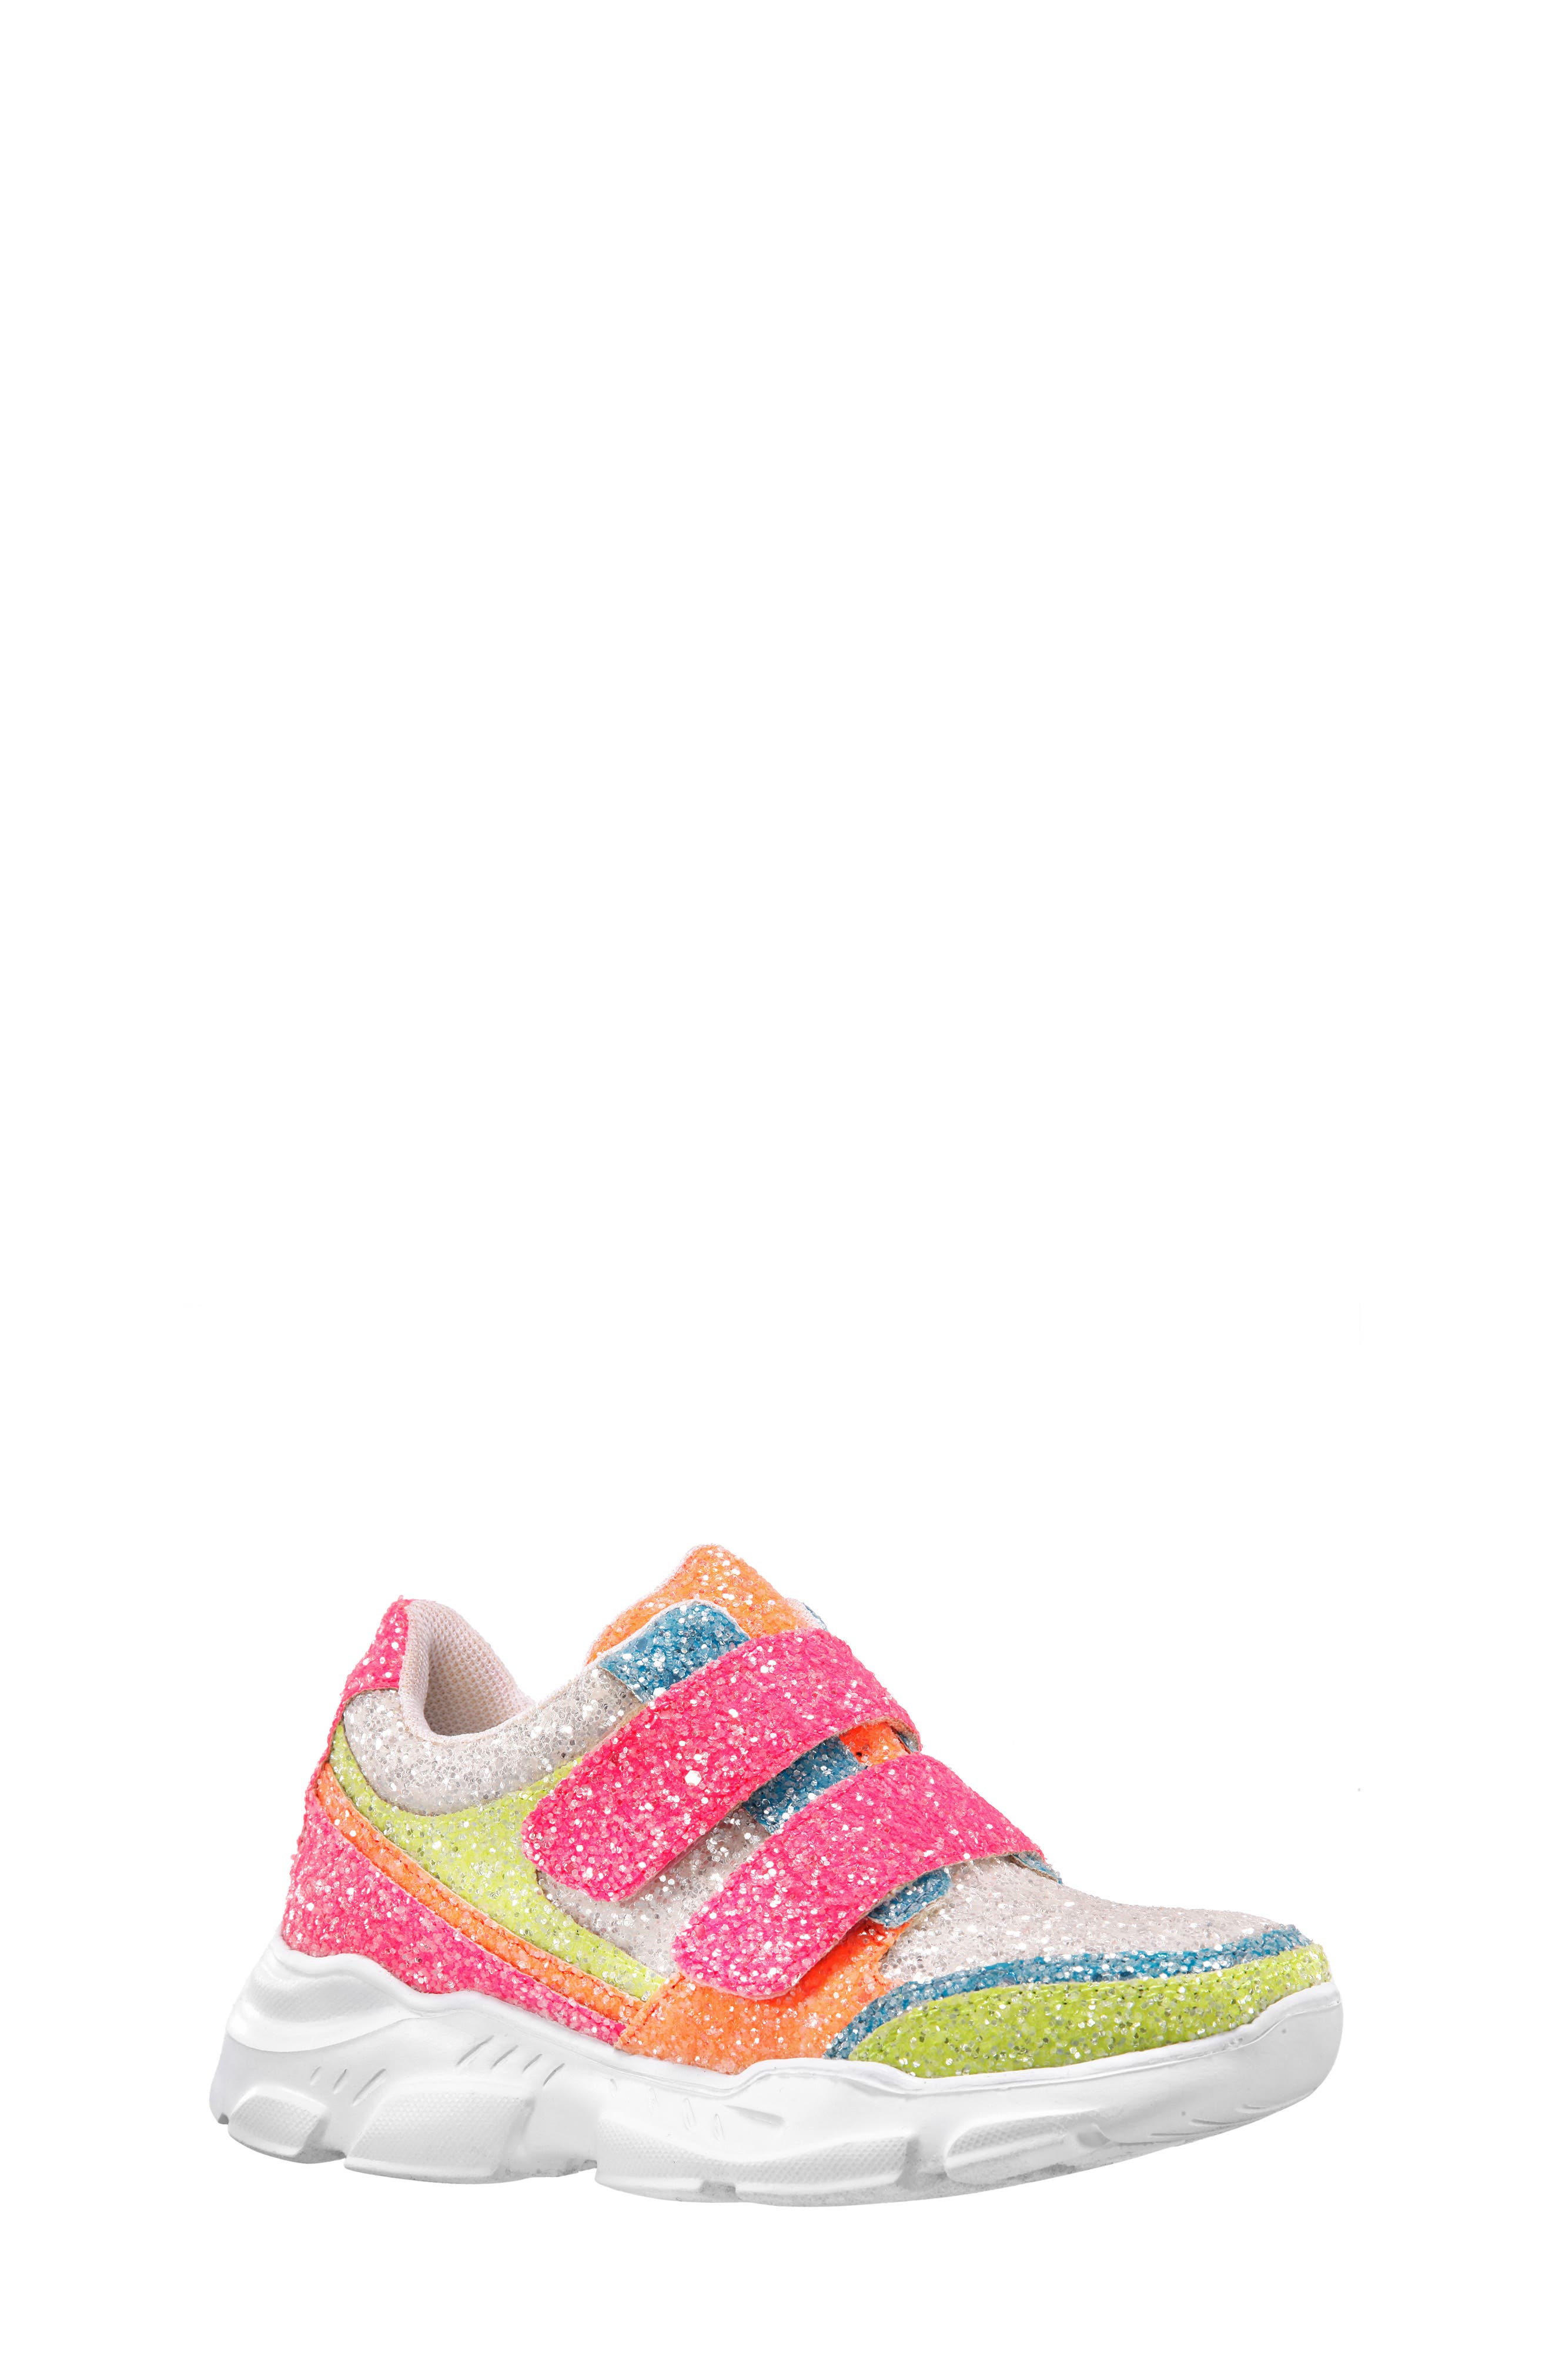 UPC 794378433293 product image for Girl's Nina Holleigh Glitter Sneaker, Size 13 M - Pink | upcitemdb.com